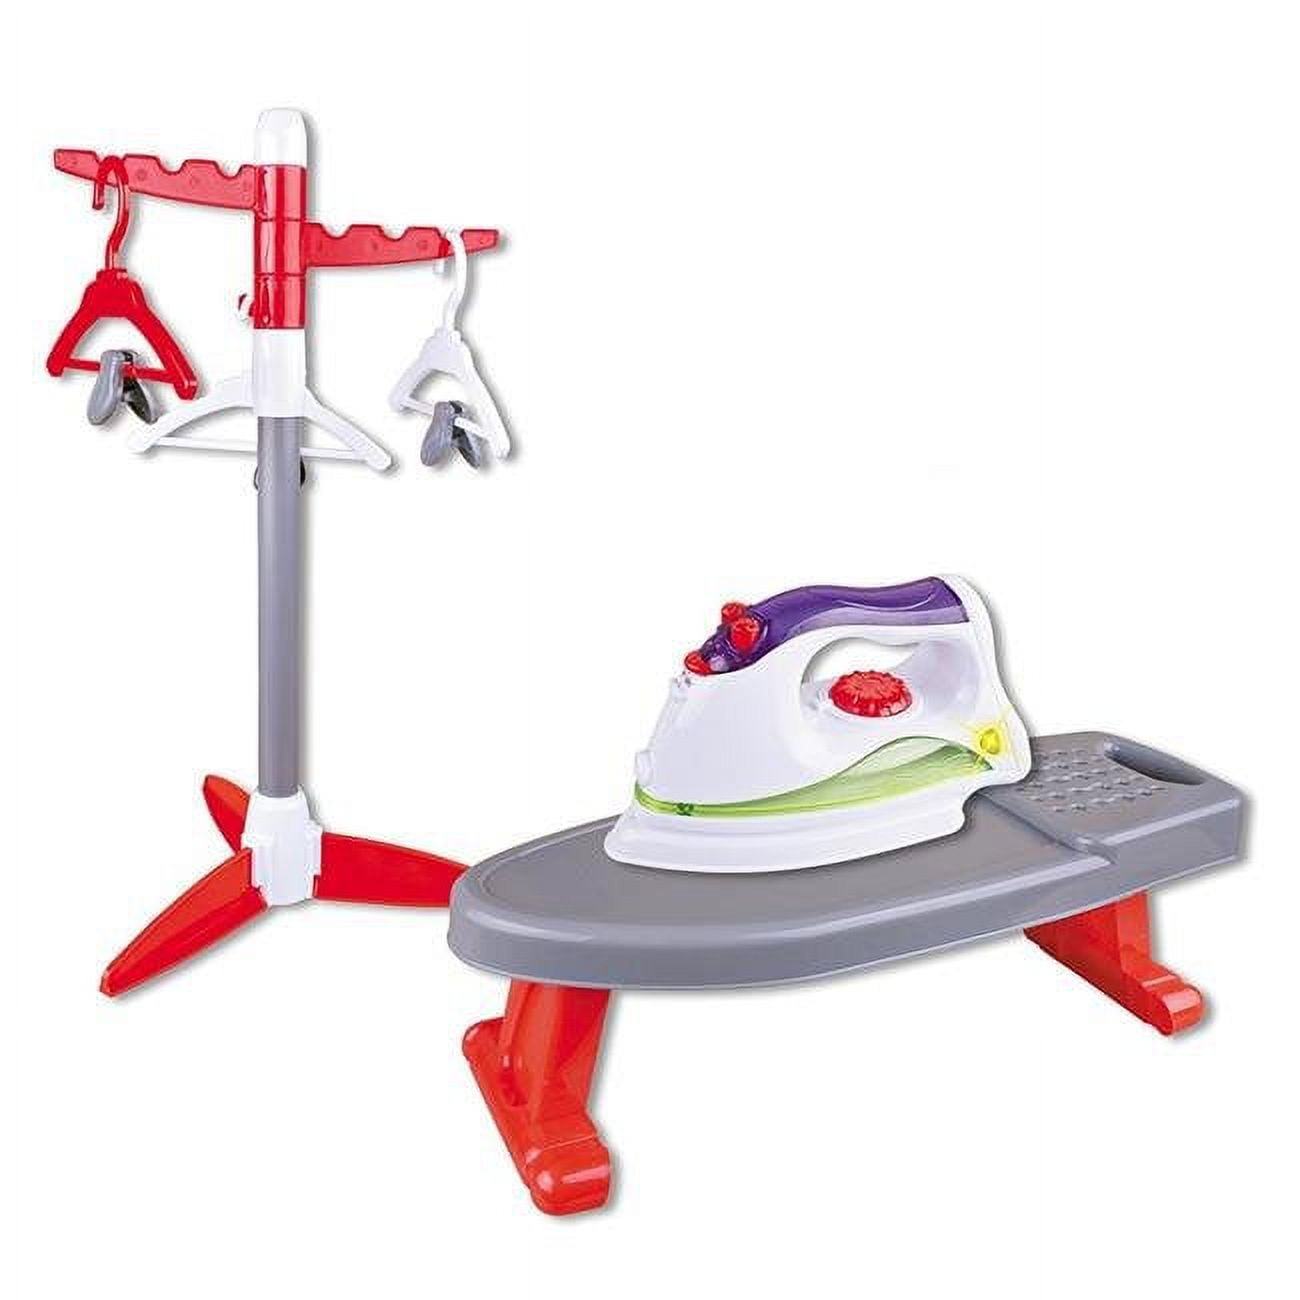 Ps09n Little Helper Ironing Playset Toy